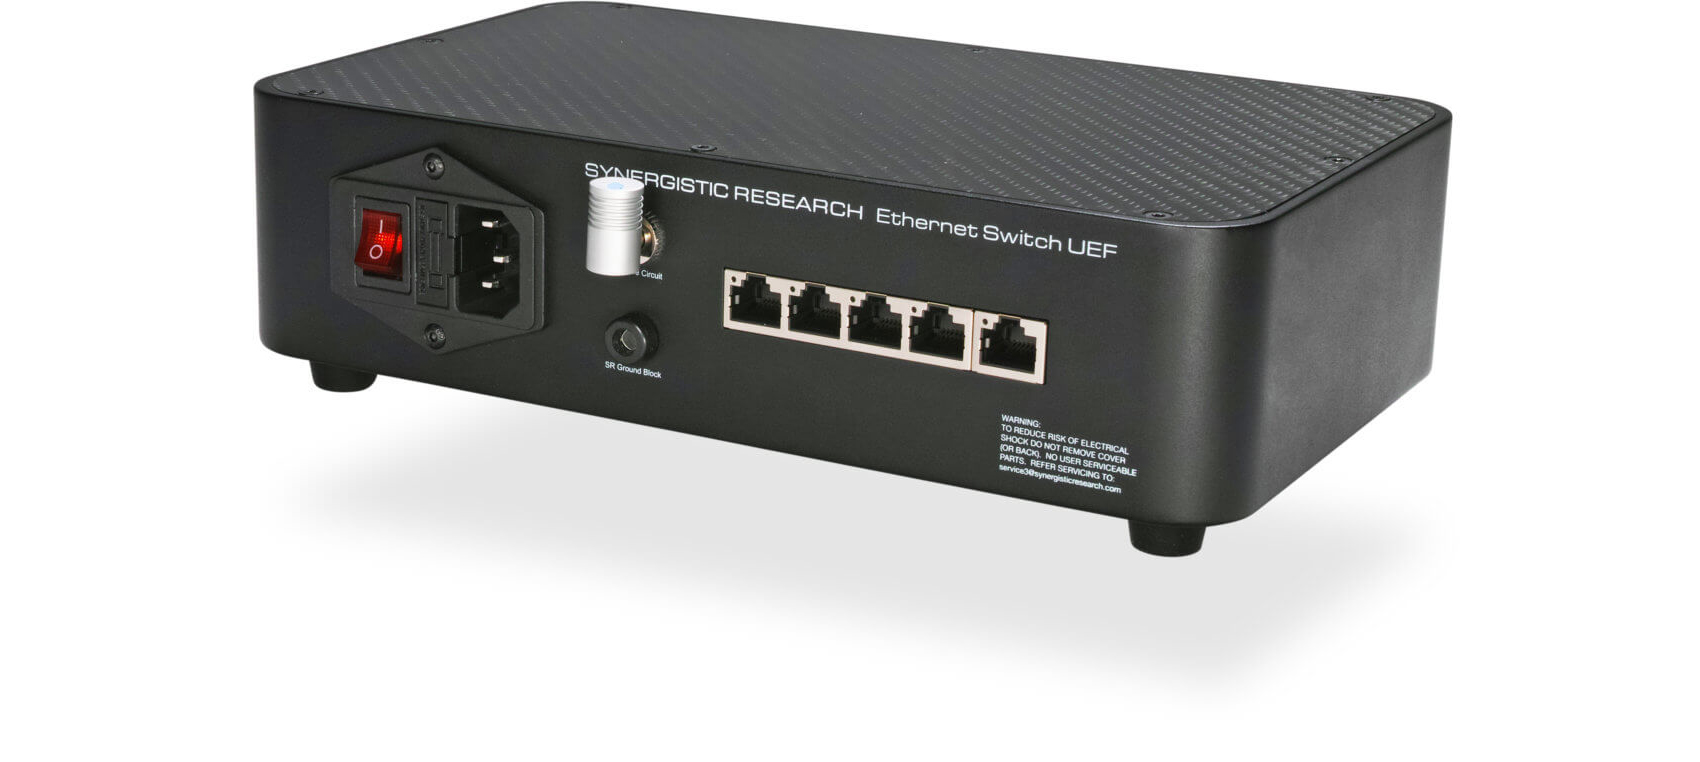 Synergistic Research ethernet switch